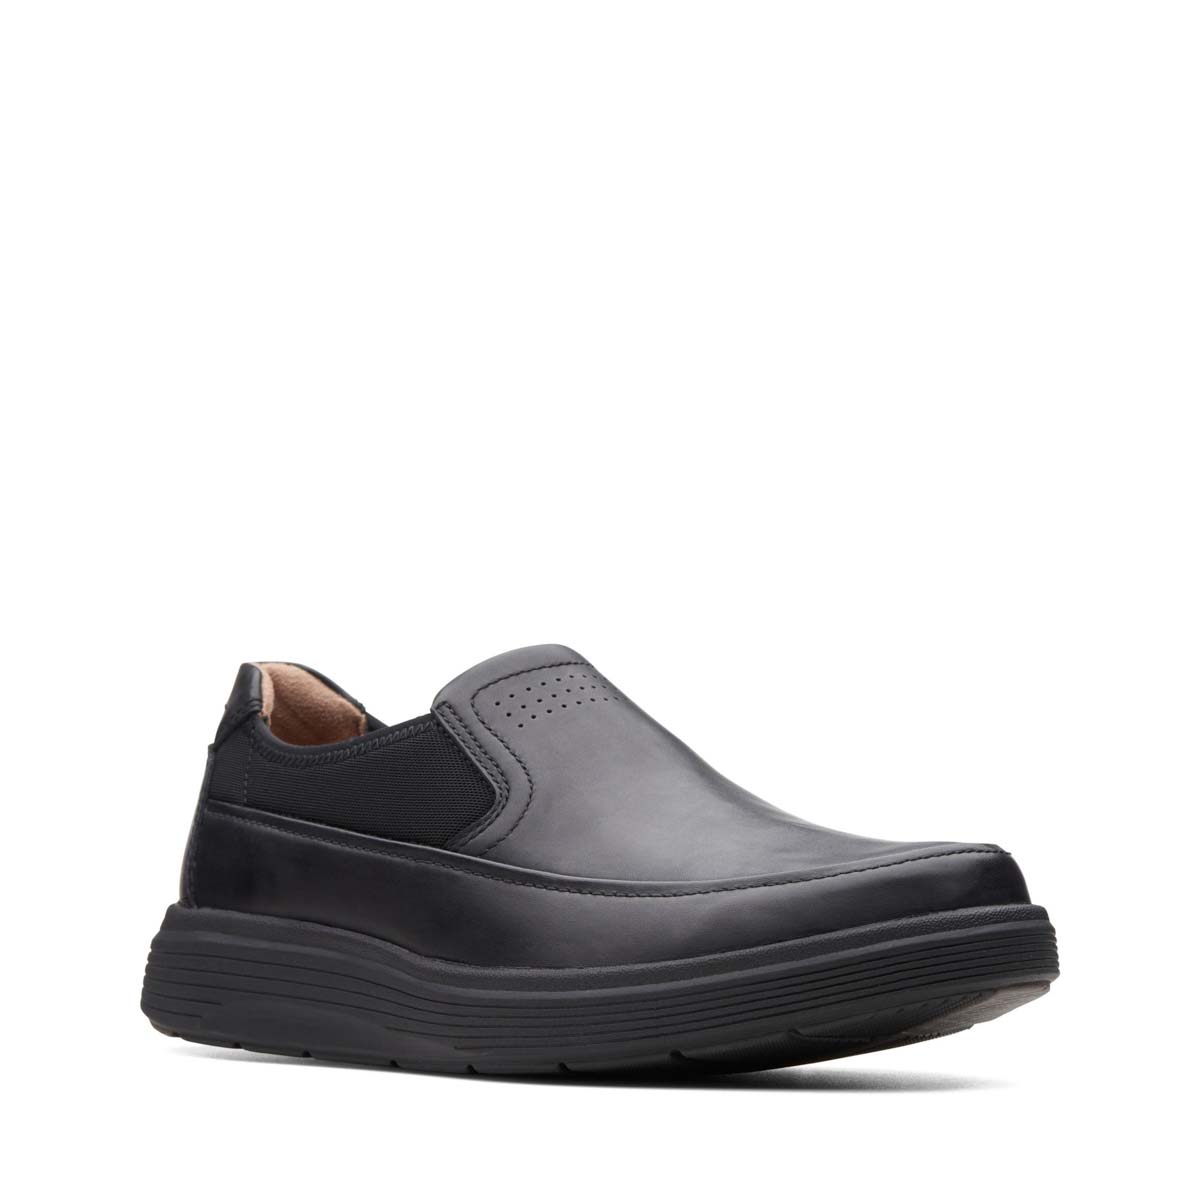 Clarks Un Abode Go Black Leather Mens Slip-On Shoes 370767G In Size 10.5 In Plain Black Leather G Width Fitting